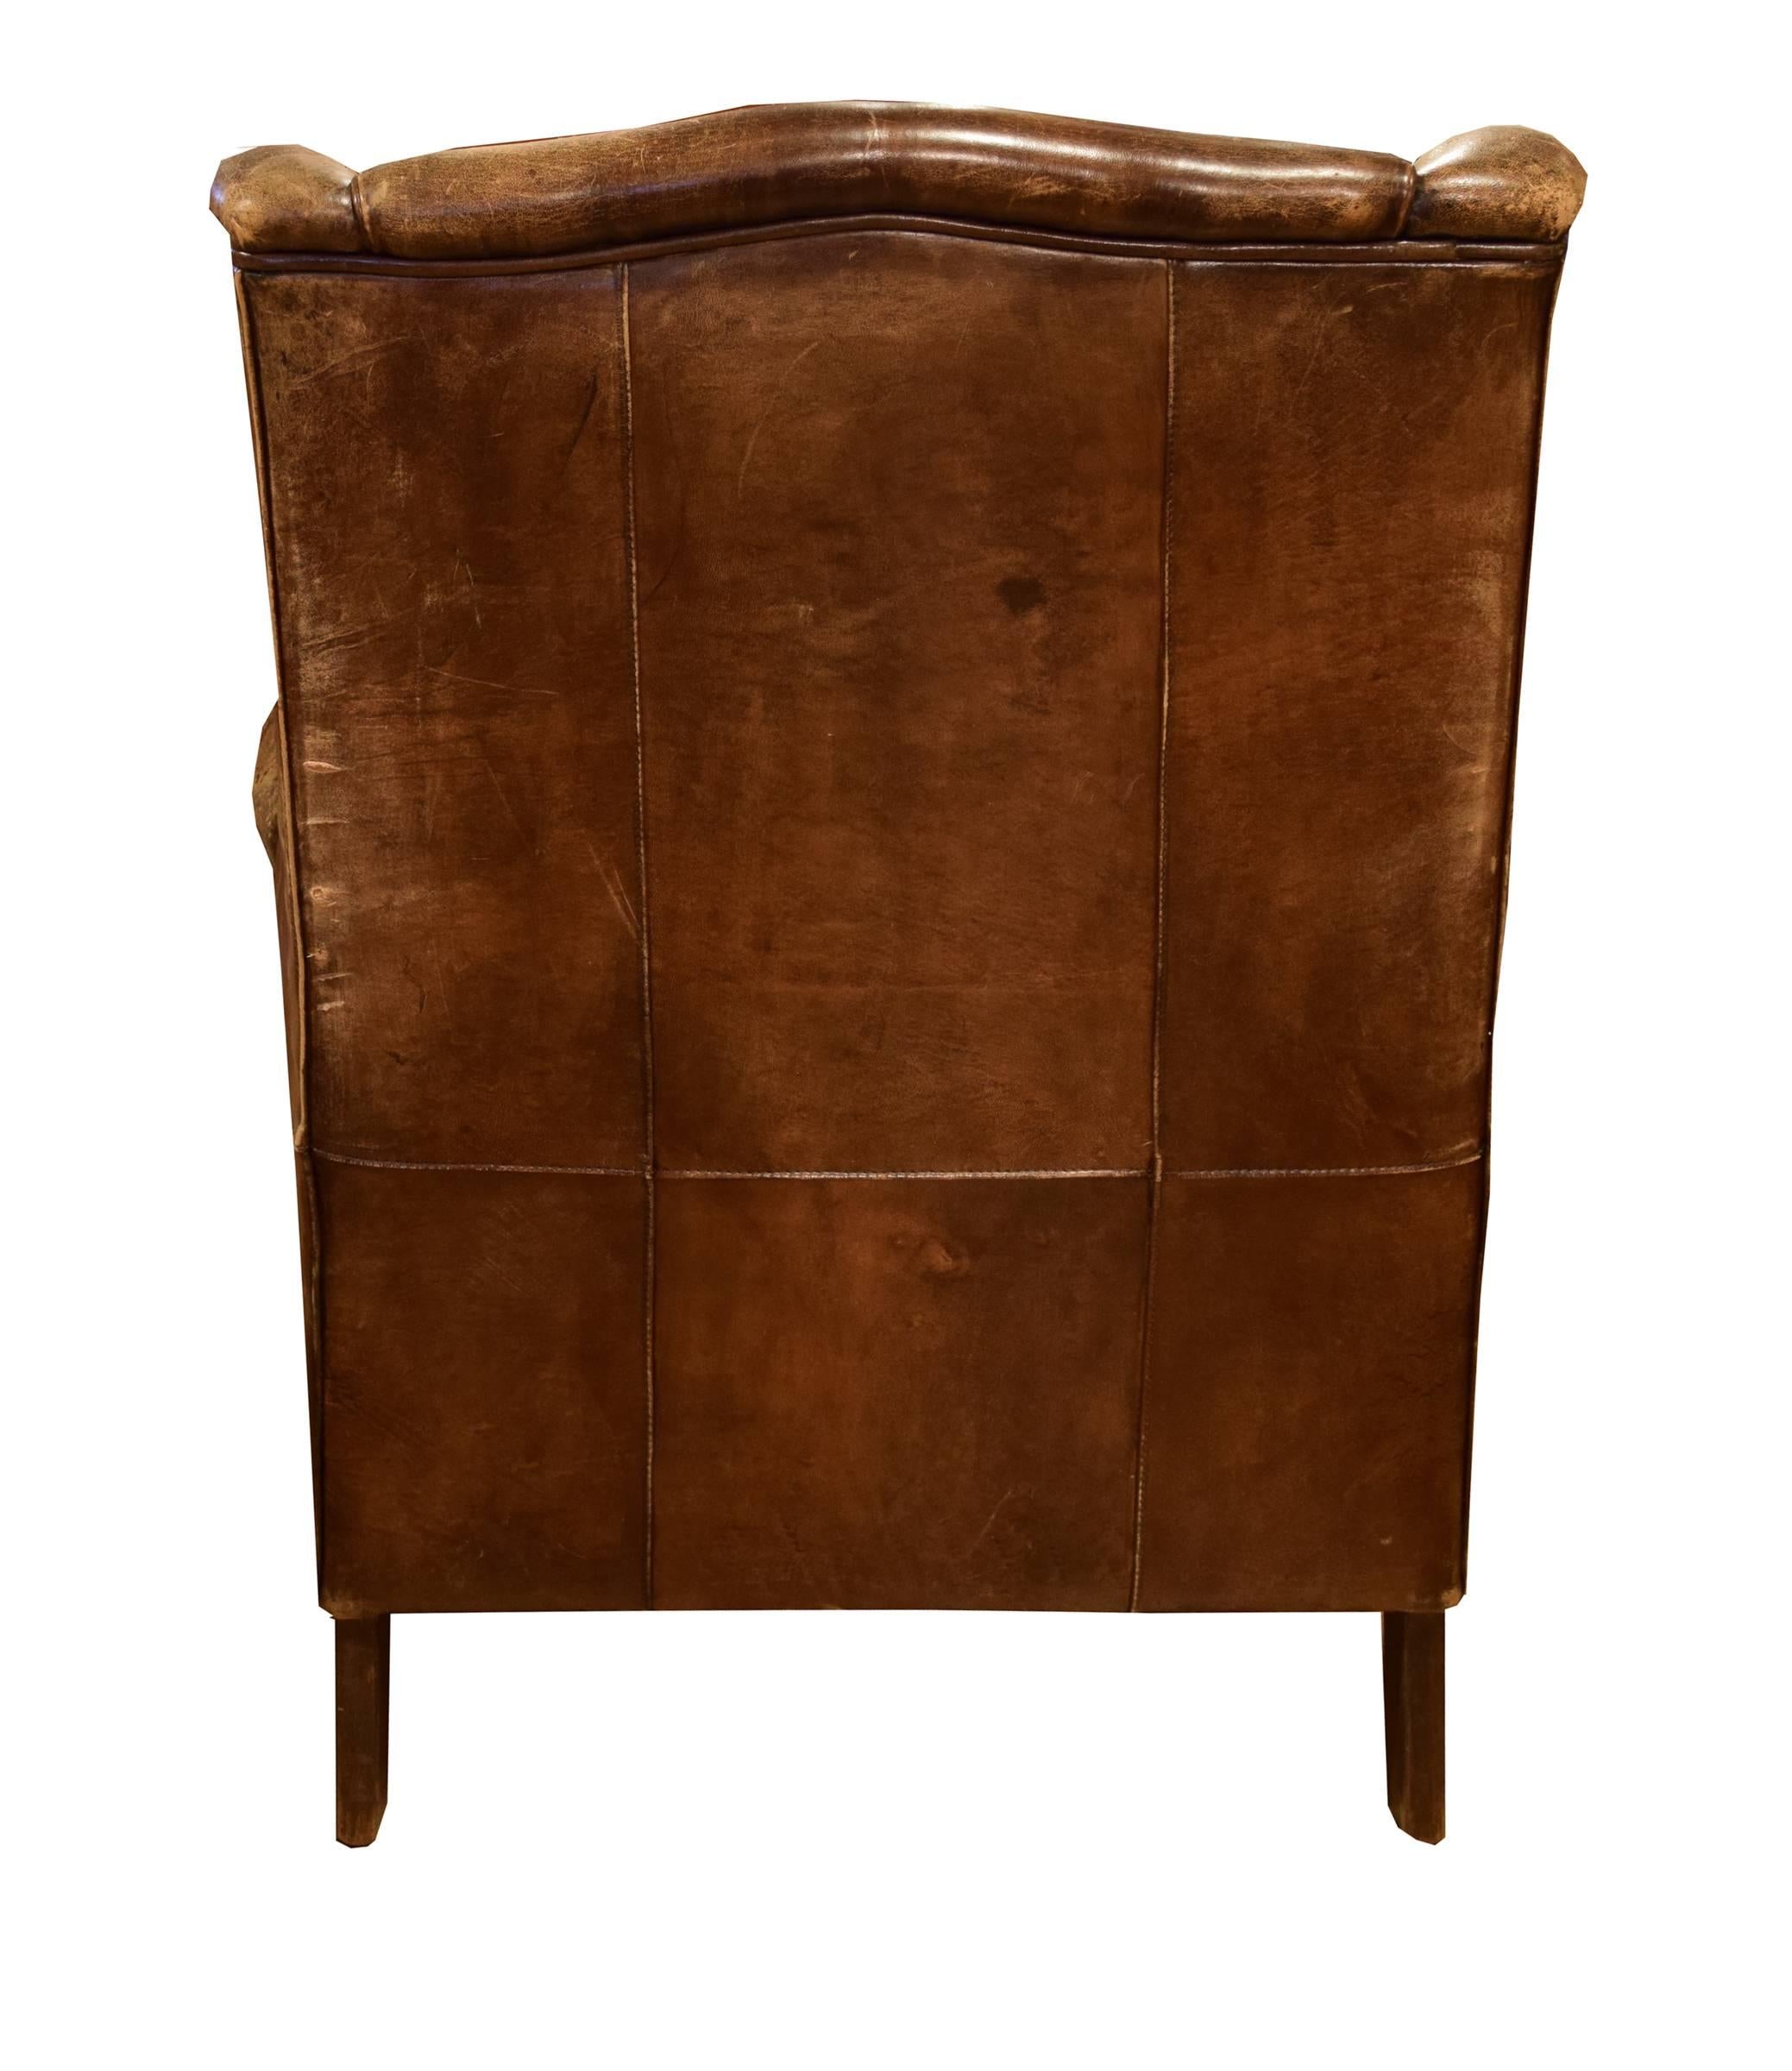 Italian Leather Wingback Chair from Italy